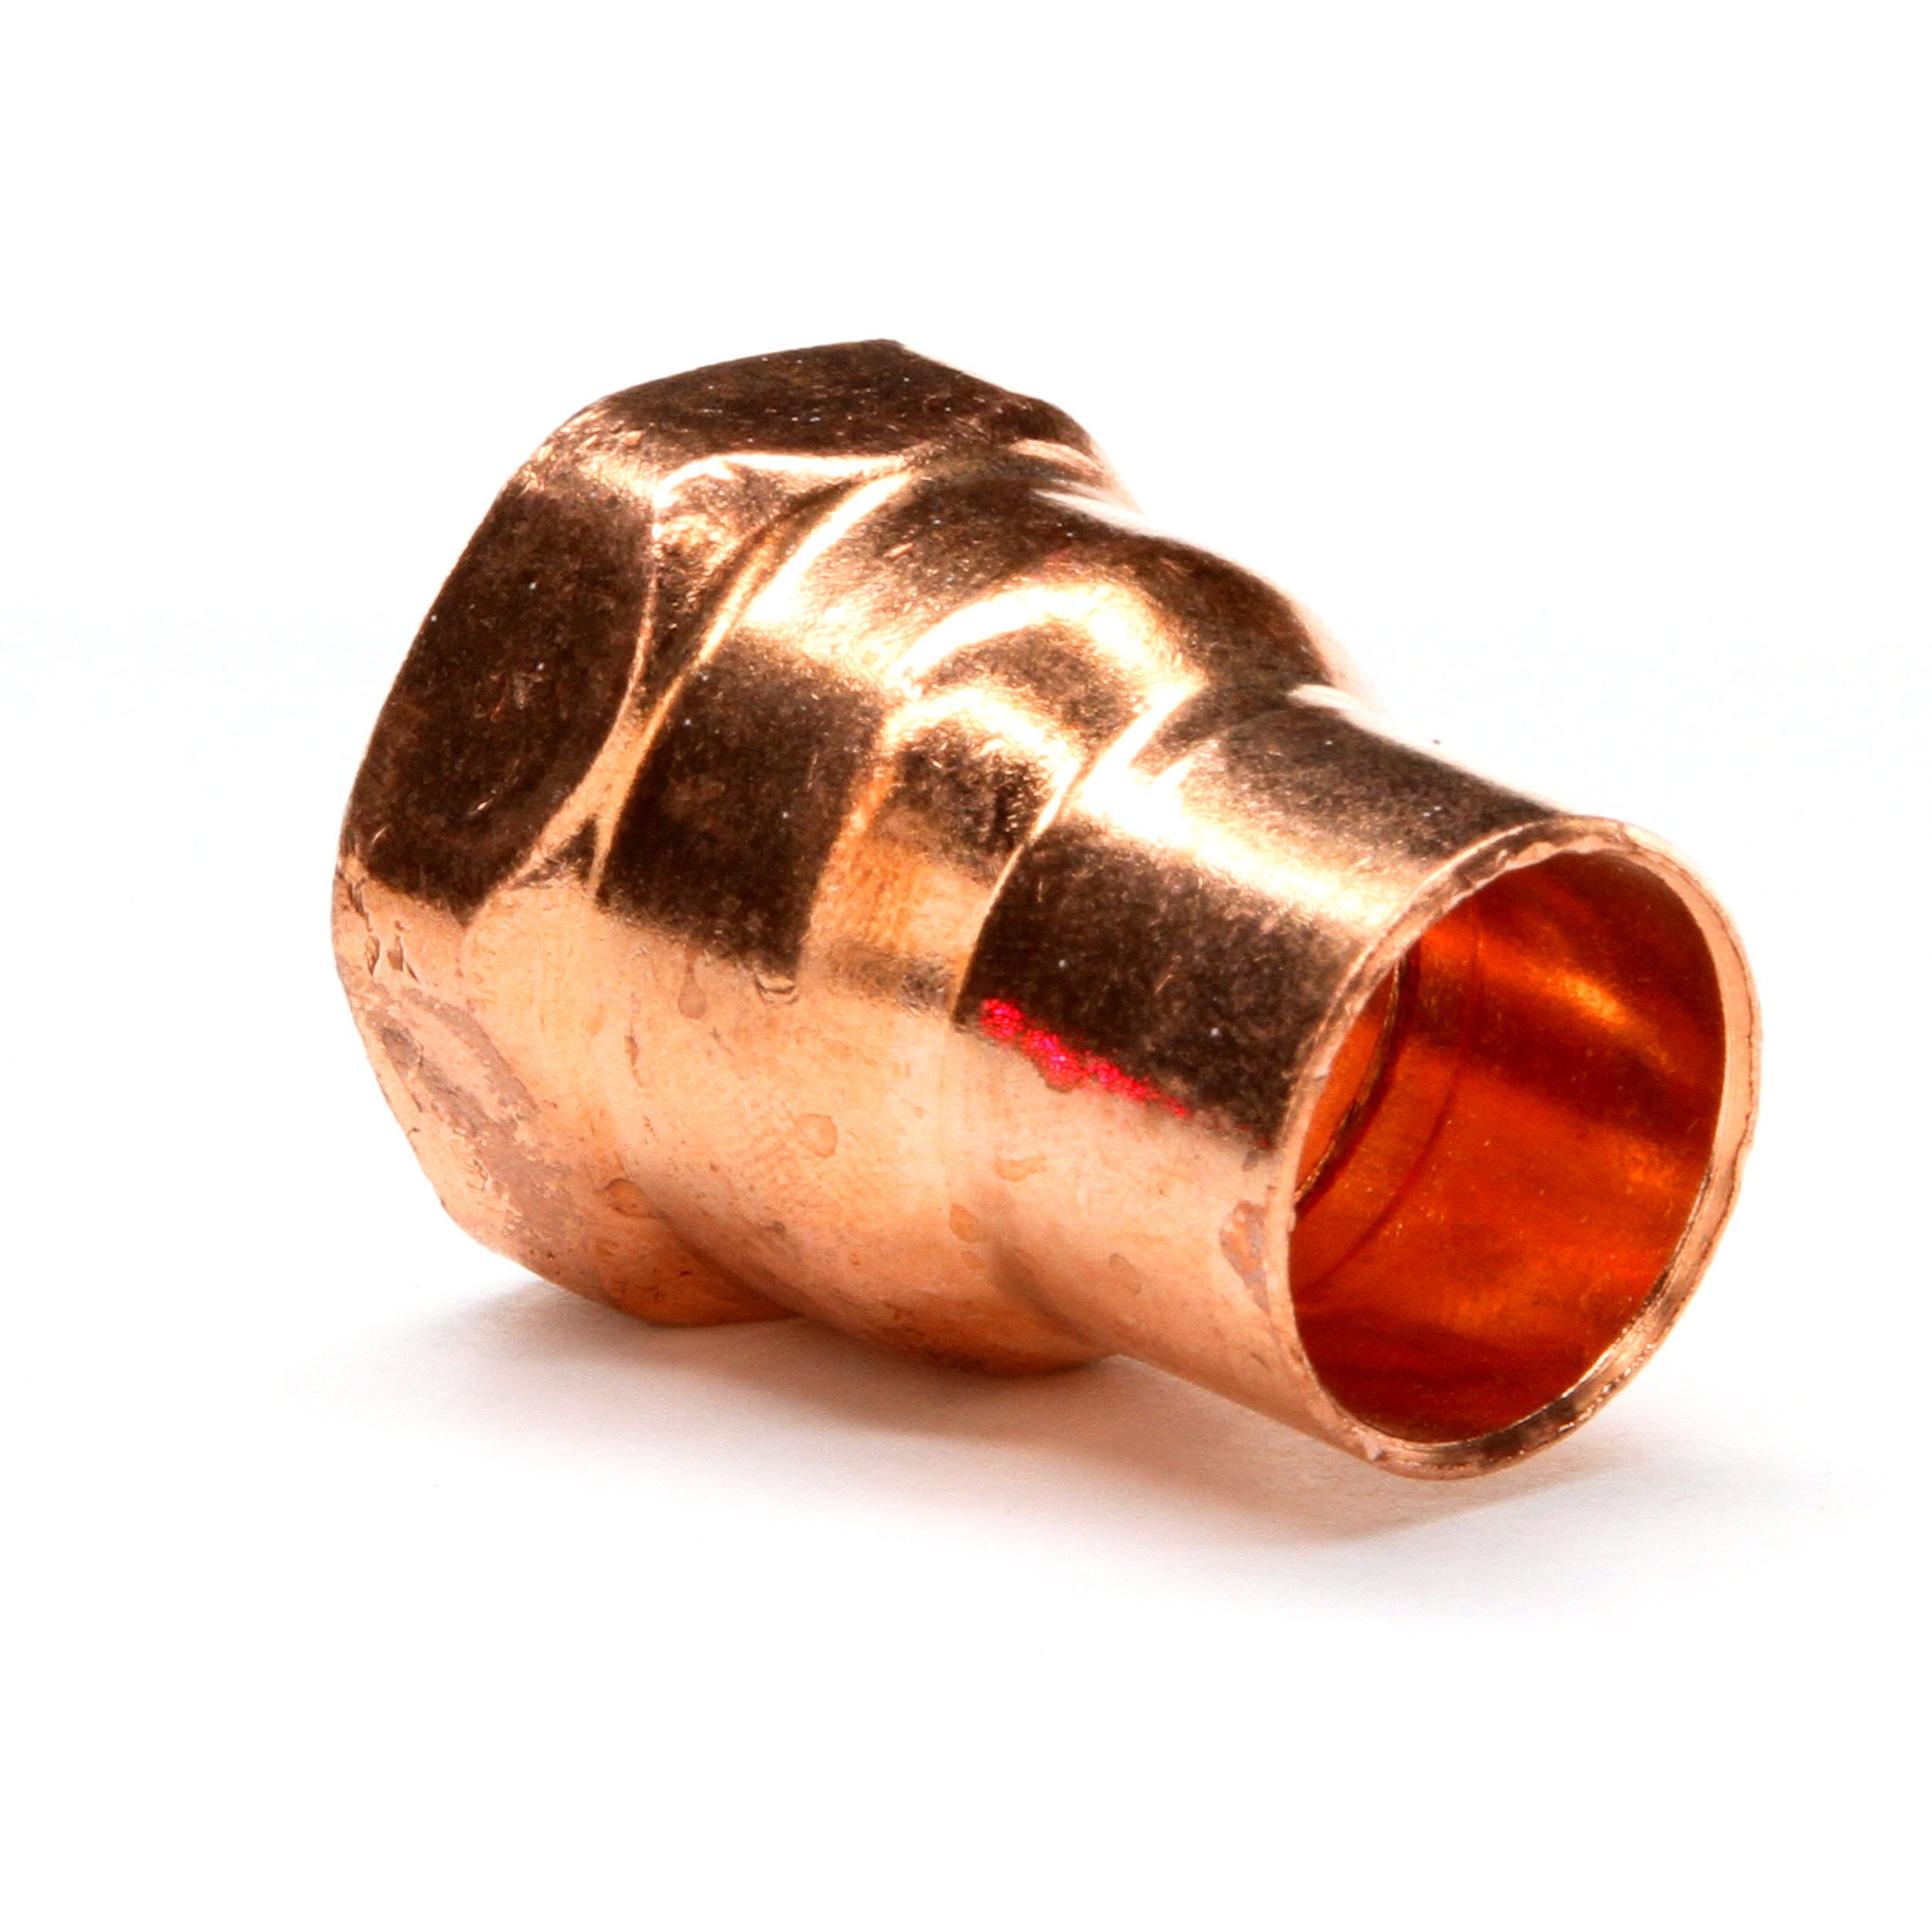 15mm x 22mm x 15mm  Reducing T TEE Copper Plumbing Pipe Fitting End Feed  QTY 1 